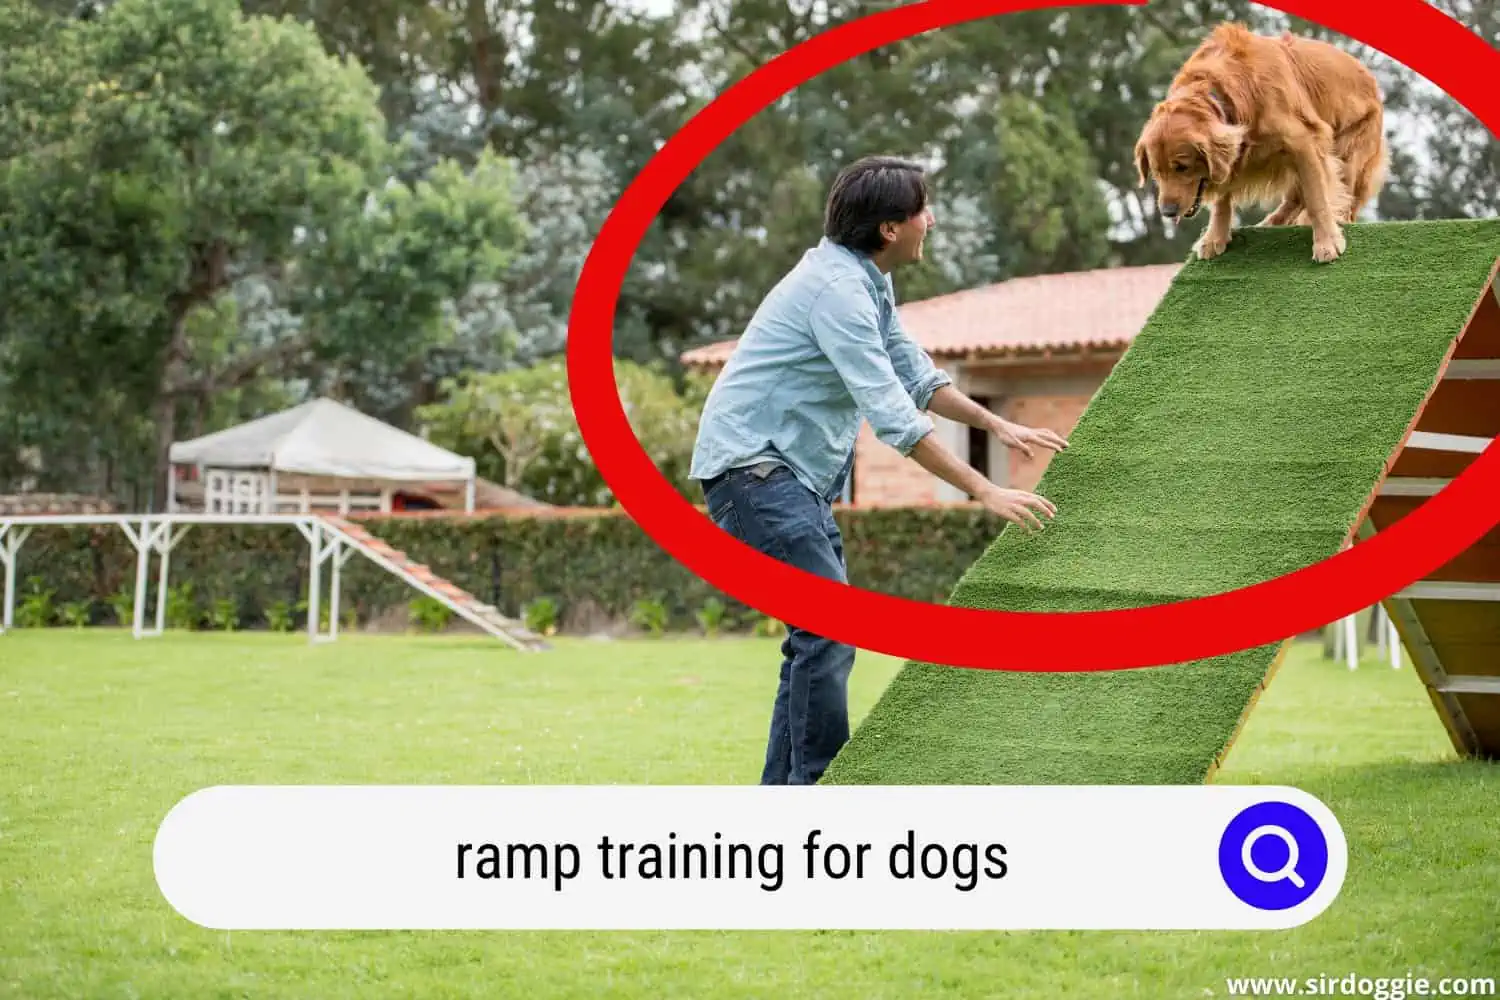 A pet owner training his dog in the ramp